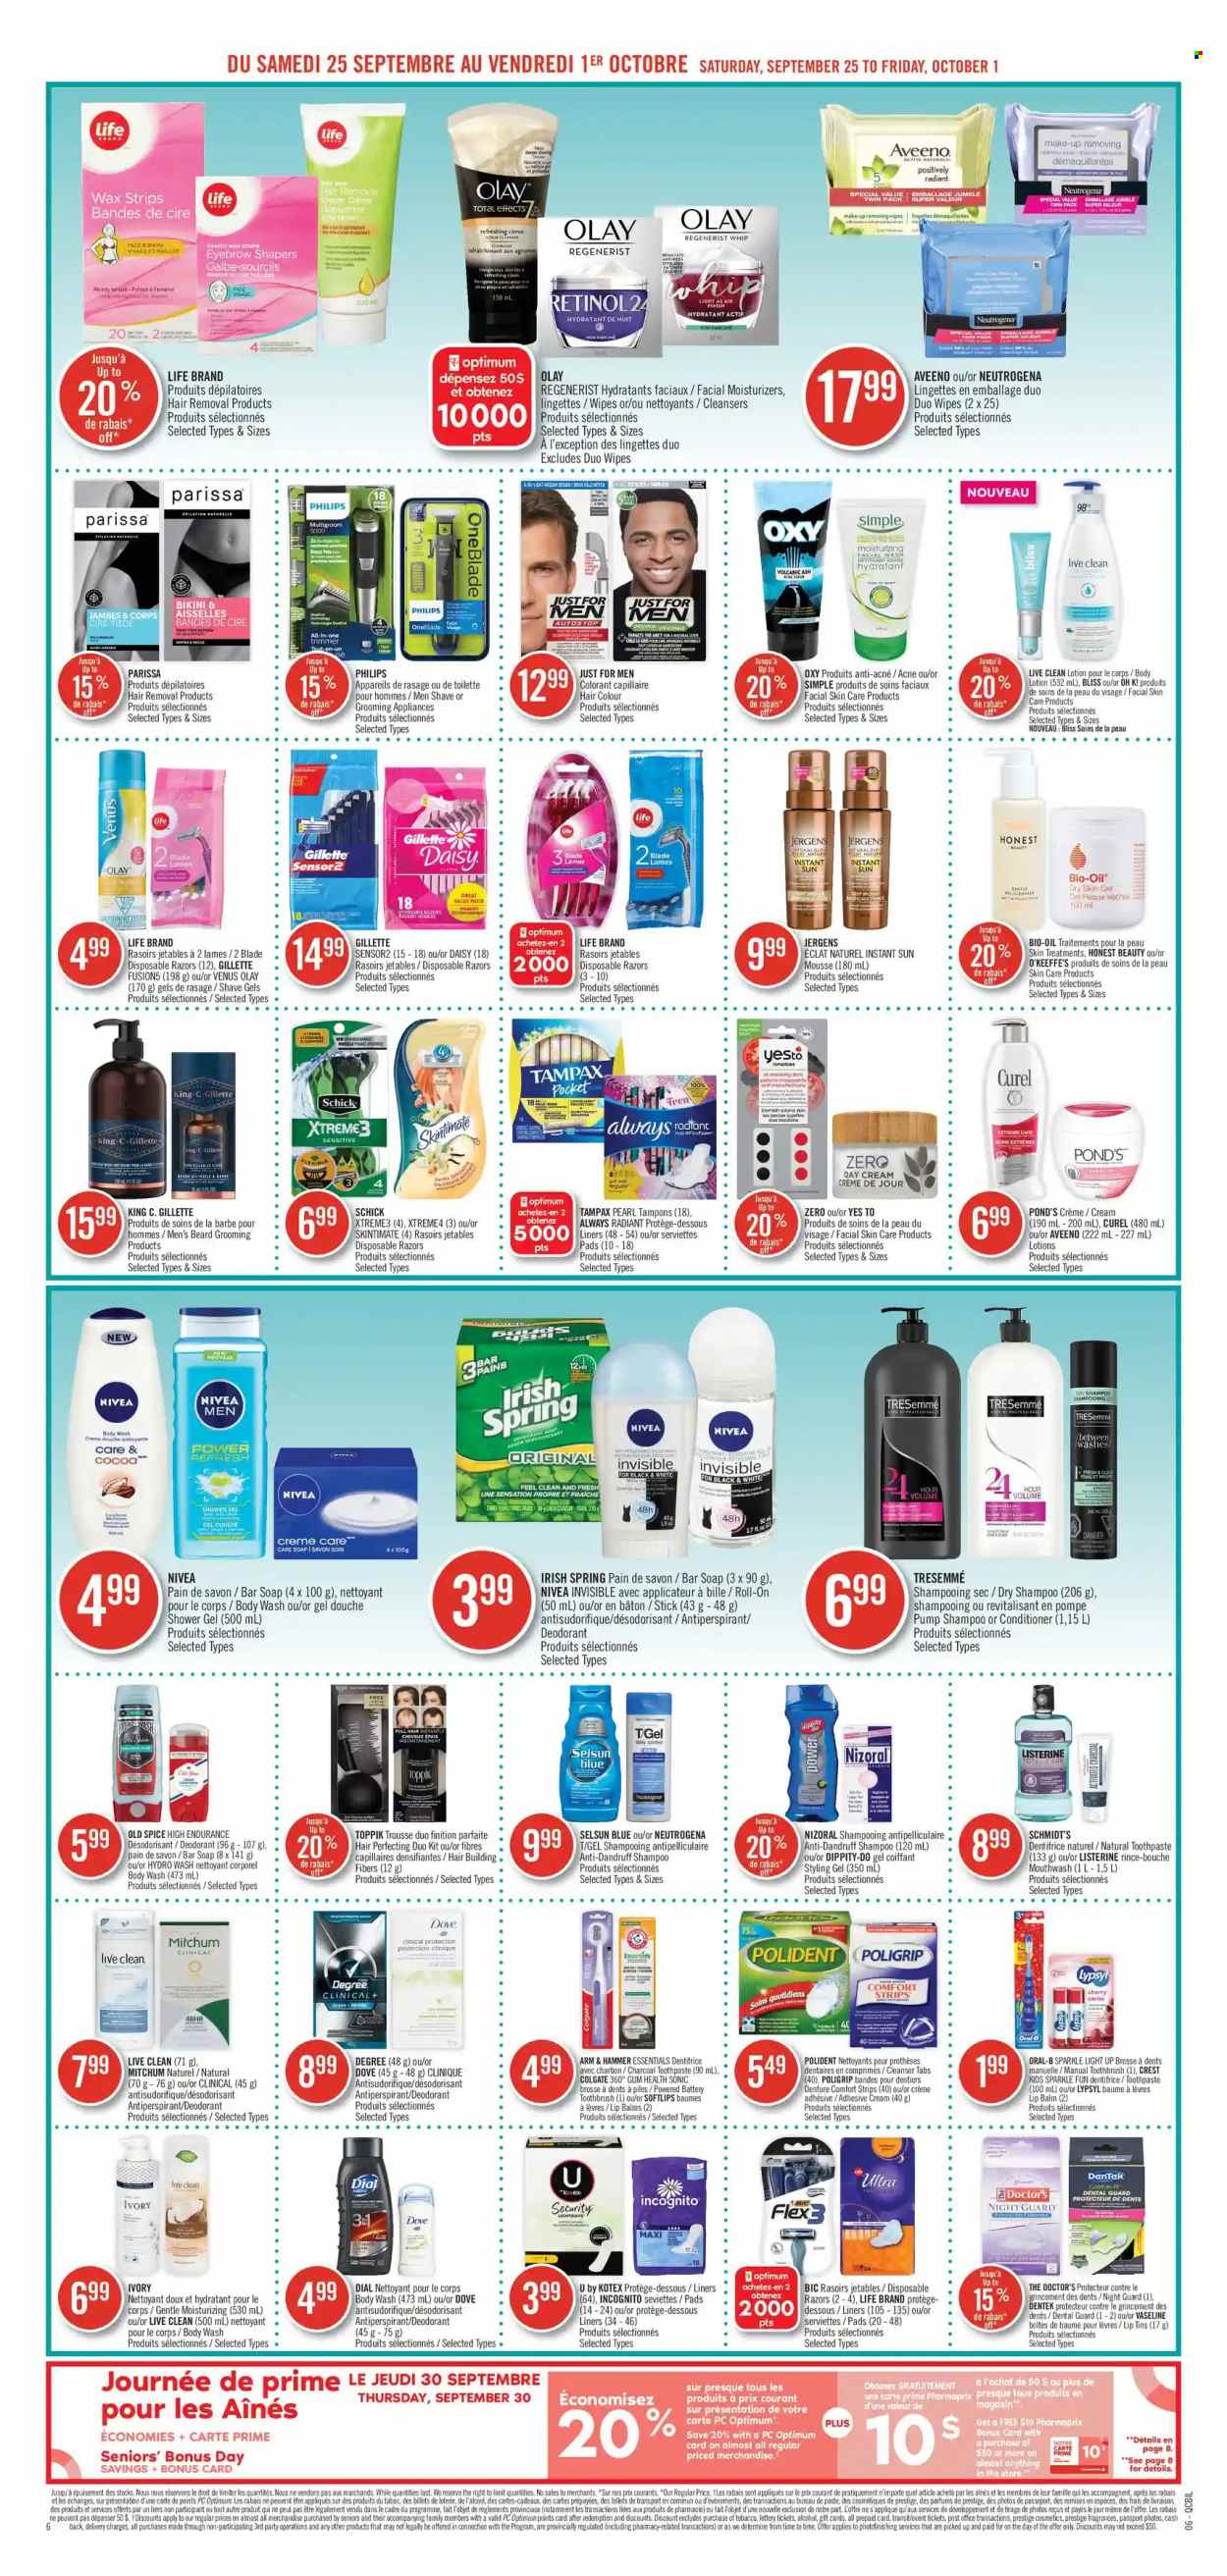 thumbnail - Pharmaprix Flyer - September 25, 2021 - October 01, 2021 - Sales products - Philips, cherries, ARM & HAMMER, cocoa, spice, oil, wipes, Aveeno, body wash, shower gel, Vaseline, soap bar, POND'S, Dial, soap, toothbrush, toothpaste, mouthwash, Polident, Crest, Kotex, tampons, cleanser, Clinique, day cream, lip balm, moisturizer, Olay, Curél, conditioner, TRESemmé, hair color, styling gel, Toppik, body lotion, Jergens, anti-perspirant, Eclat, roll-on, BIC, Schick, Venus, hair removal, wax strips, disposable razor, trimmer, makeup, pump, Dove, Colgate, Gillette, Listerine, Neutrogena, shampoo, Tampax, Nivea, Old Spice, Oral-B, deodorant. Page 8.